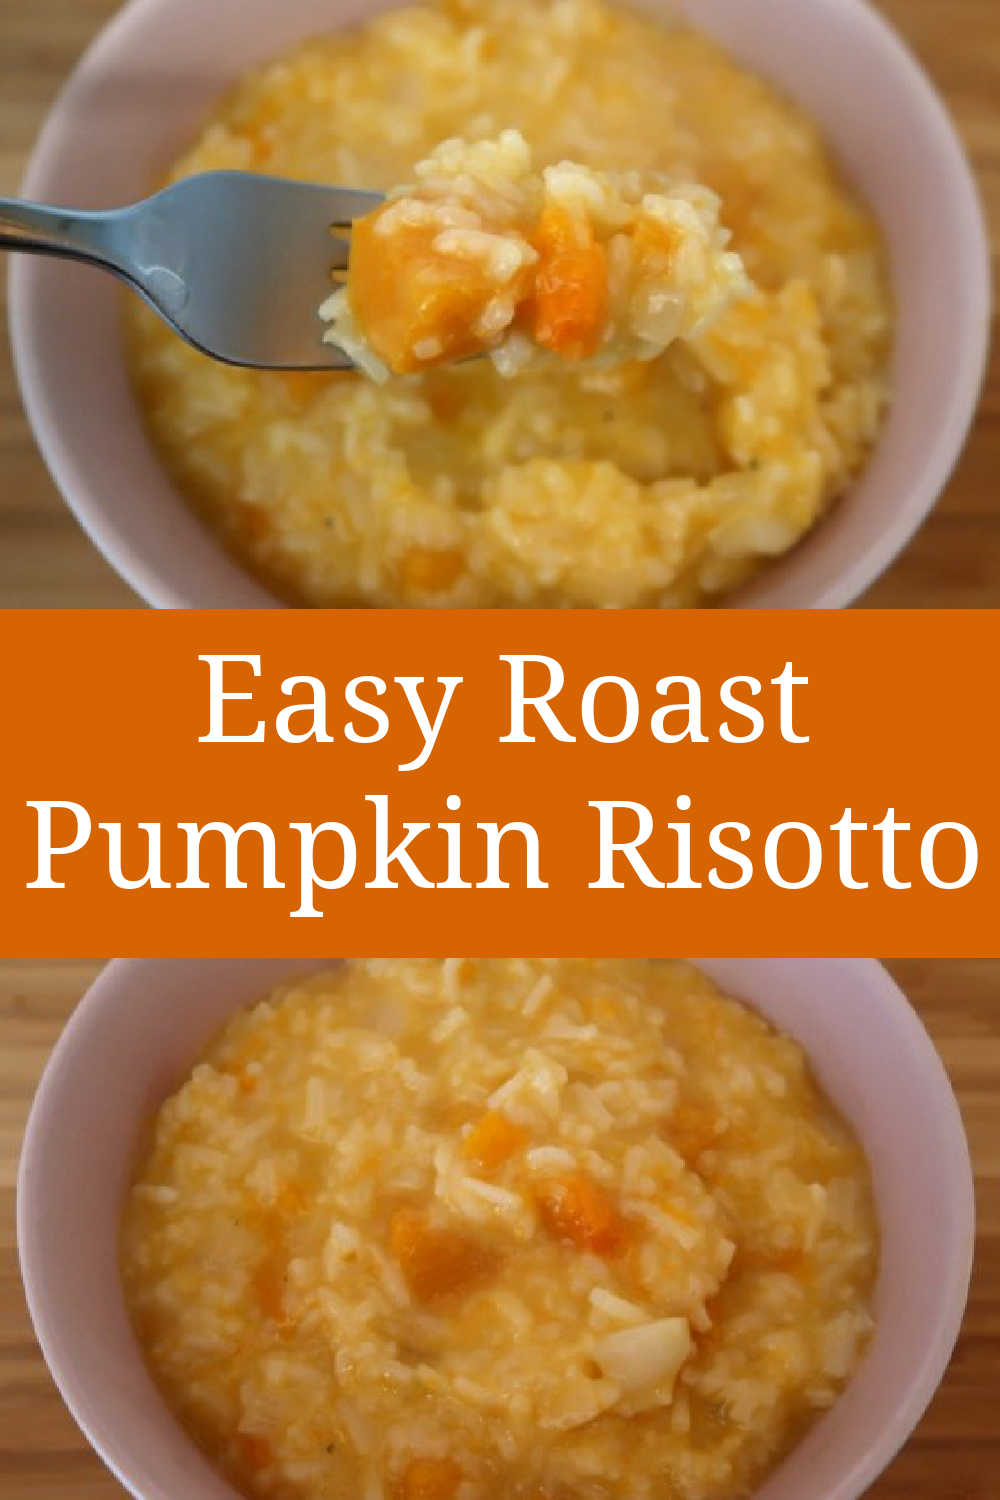 Roast Pumpkin Risotto Recipe - How to make the best easy creamy risotto with roasted pumpkin.